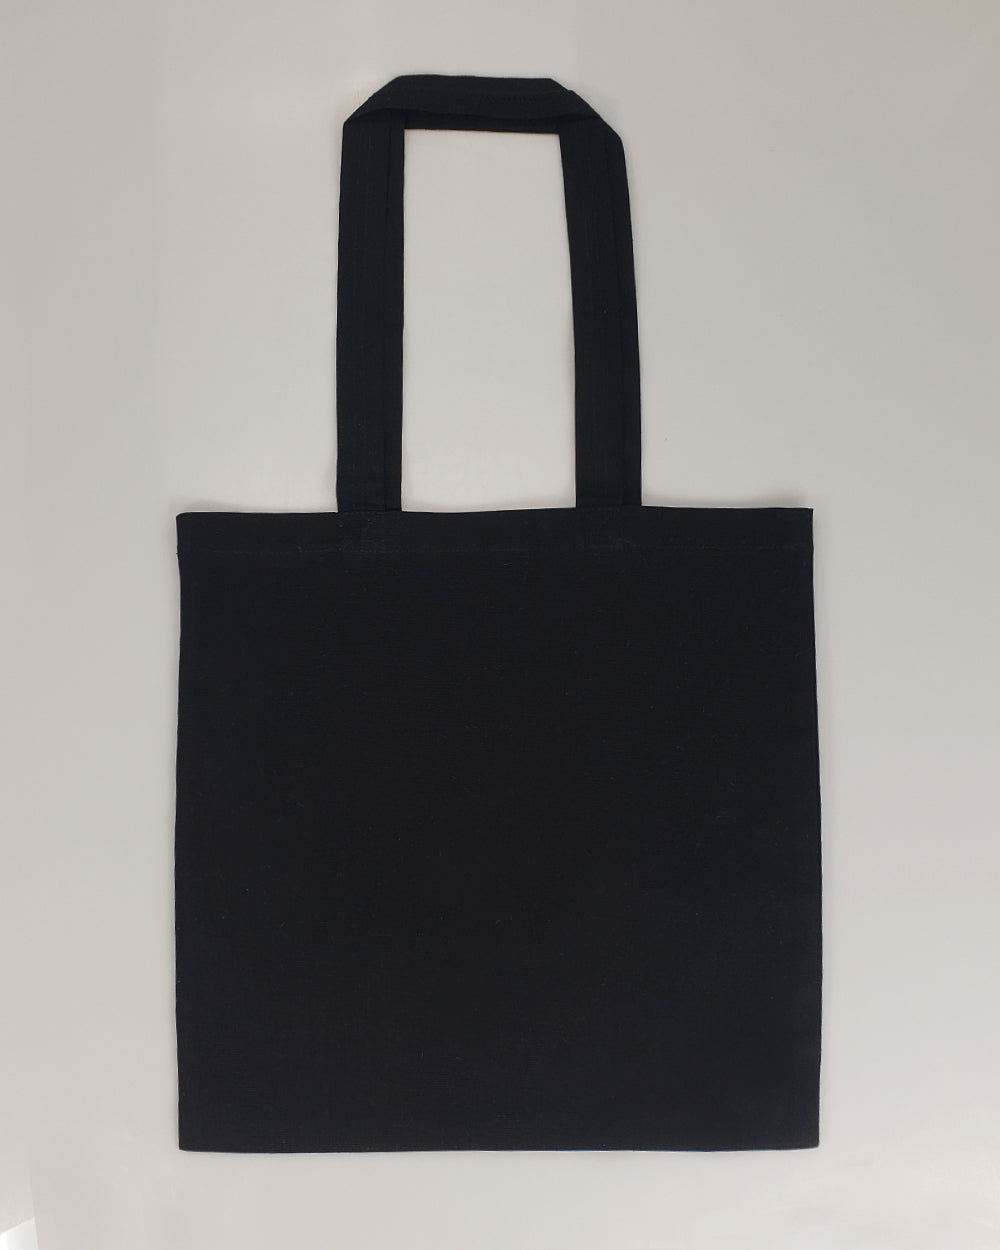 12 ct Eco-Friendly Canvas Convention Tote Bags - By Dozen